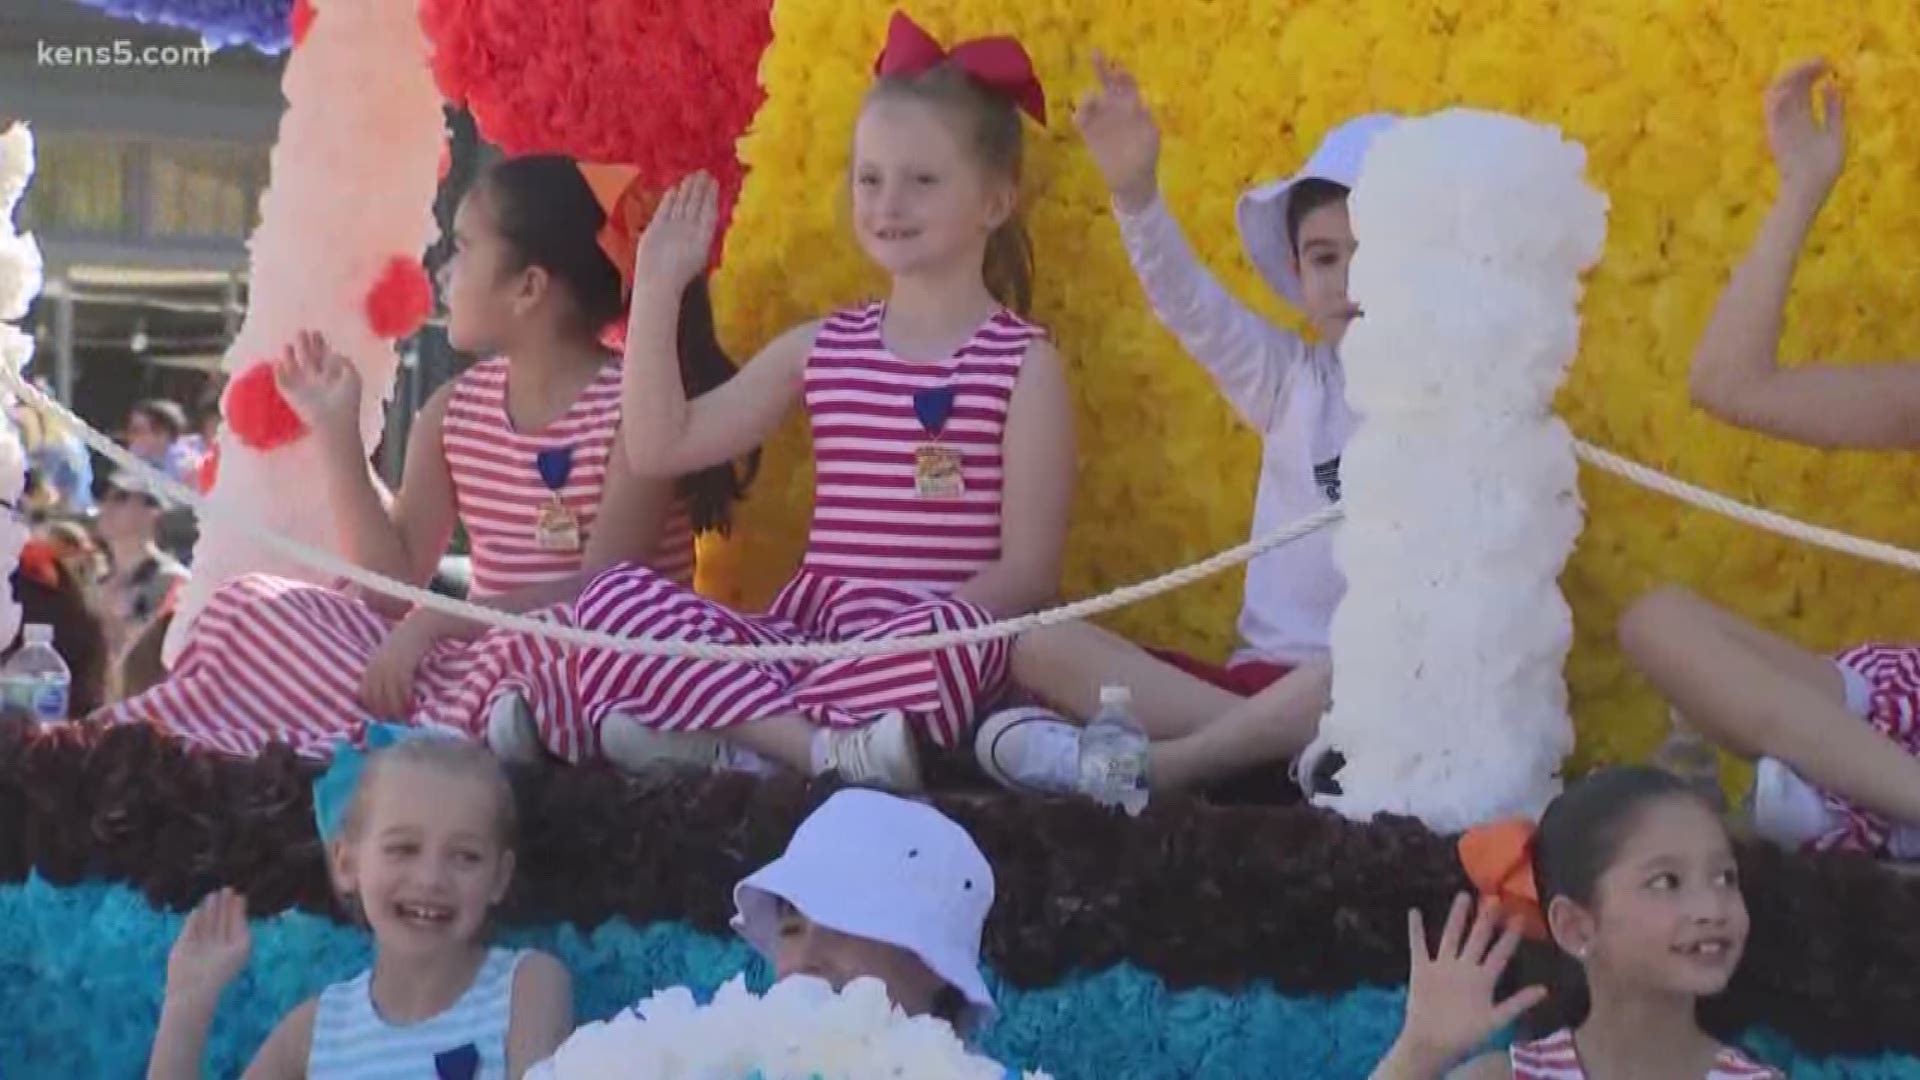 Fiesta-goers lined the streets of downtown San Antonio to cheer on the floats that made their way past for the 128th straight year.